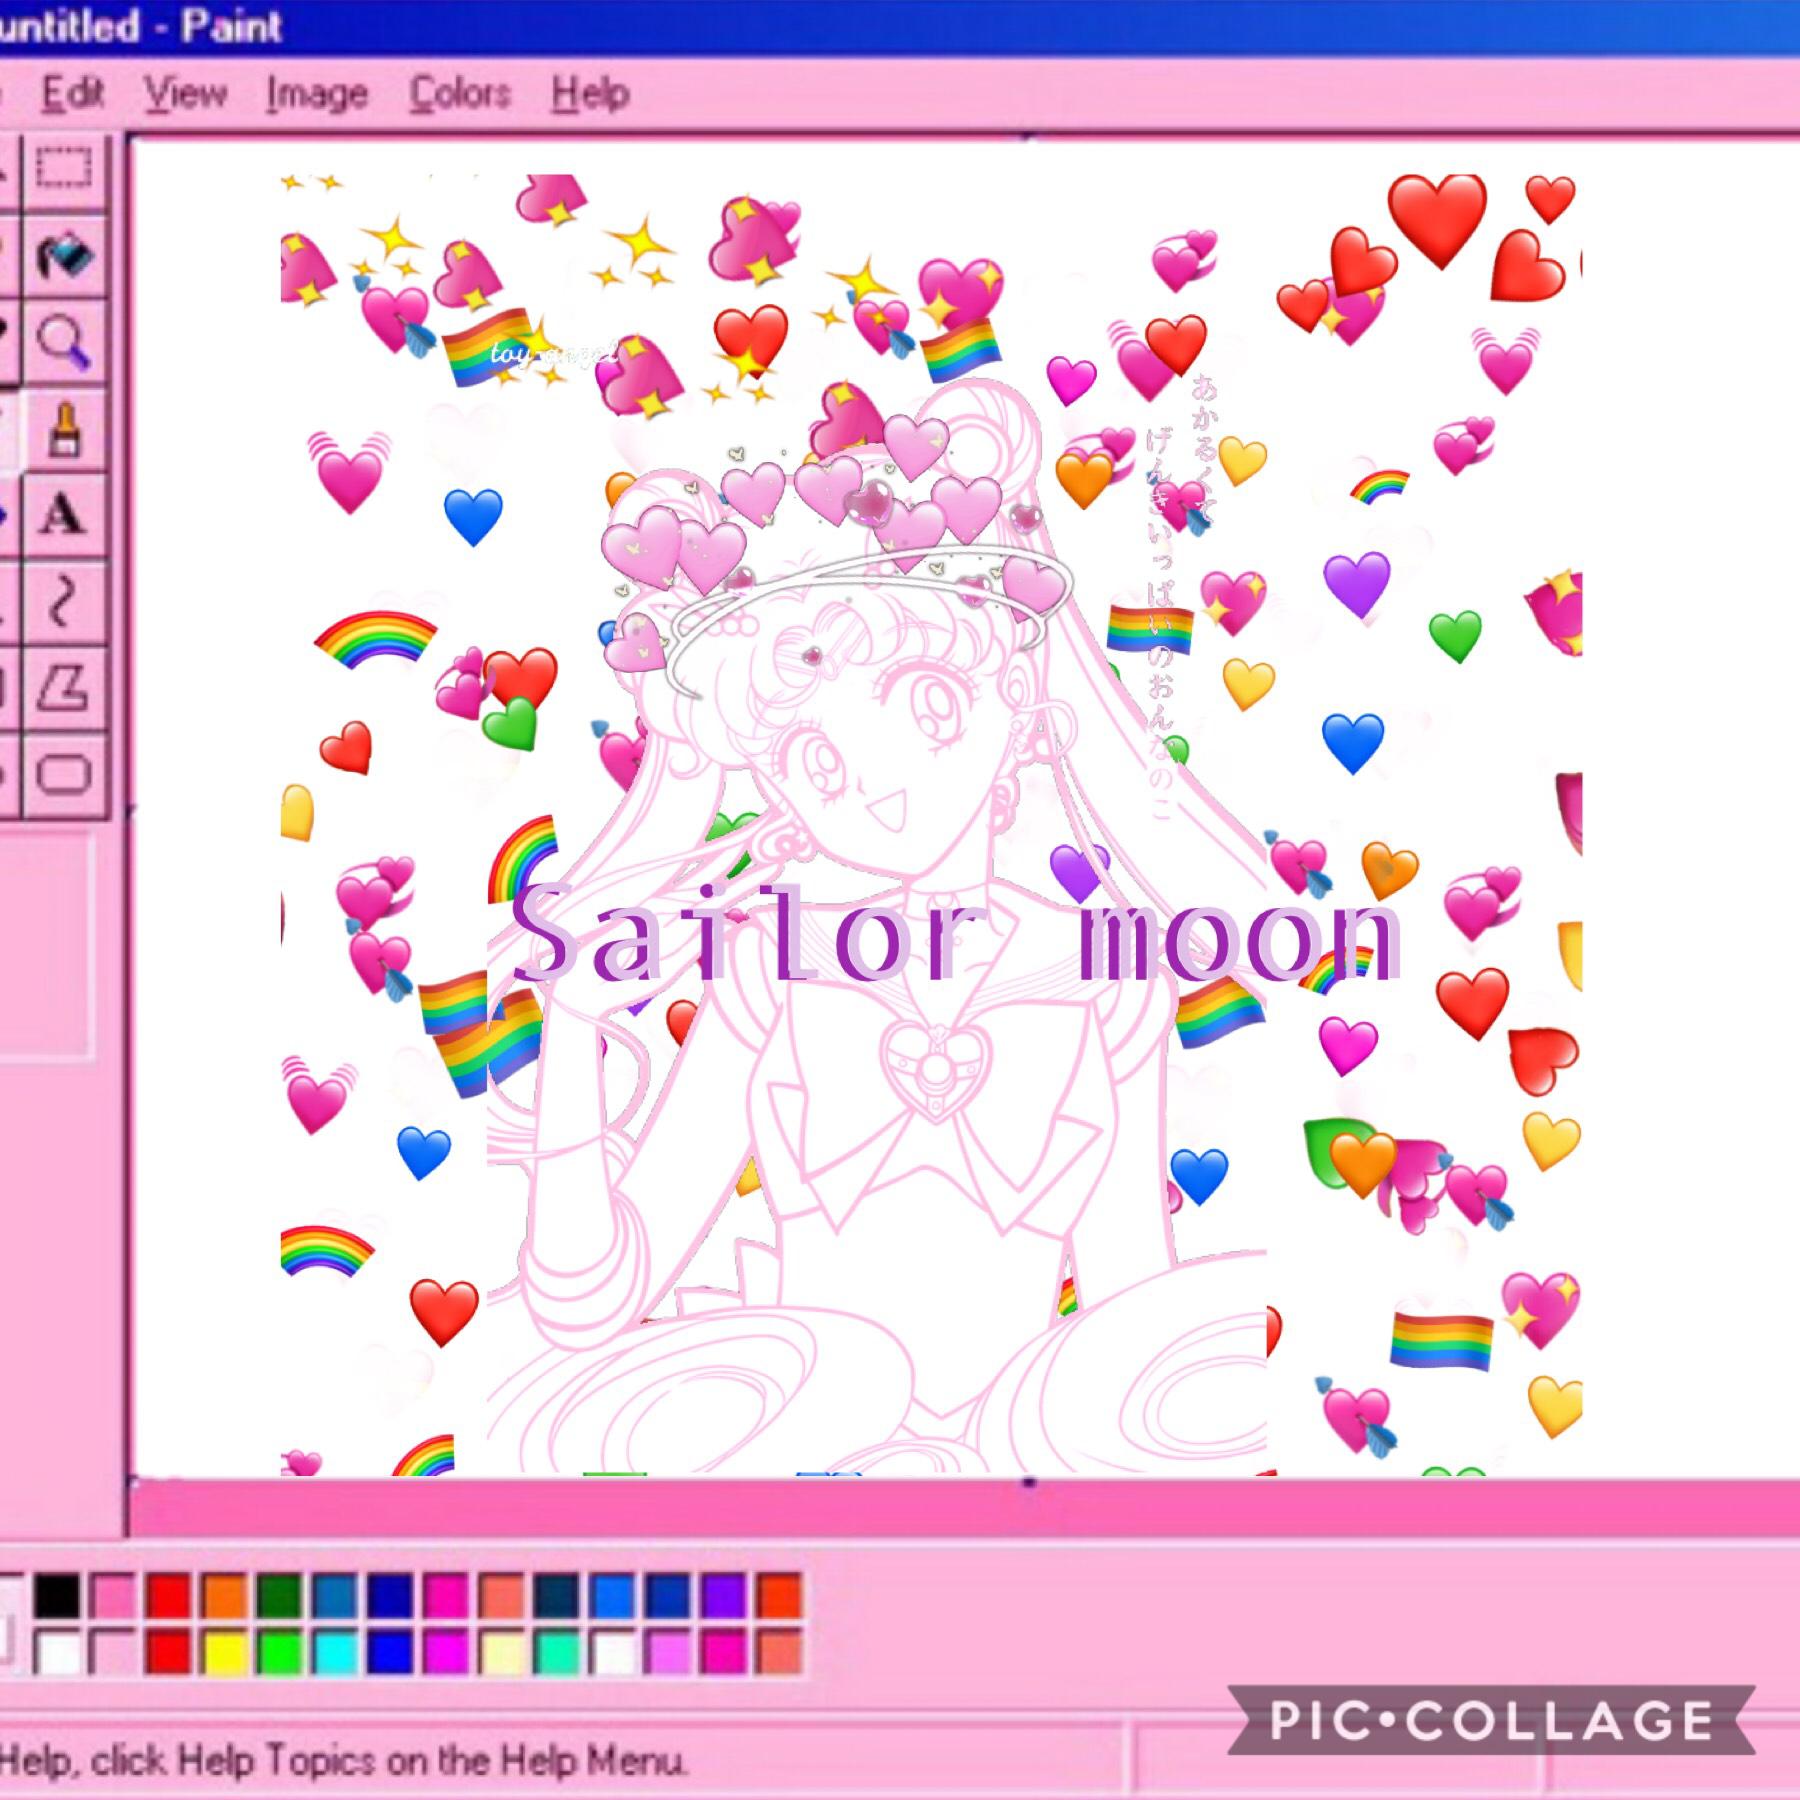 Sailor moon ( by sis)